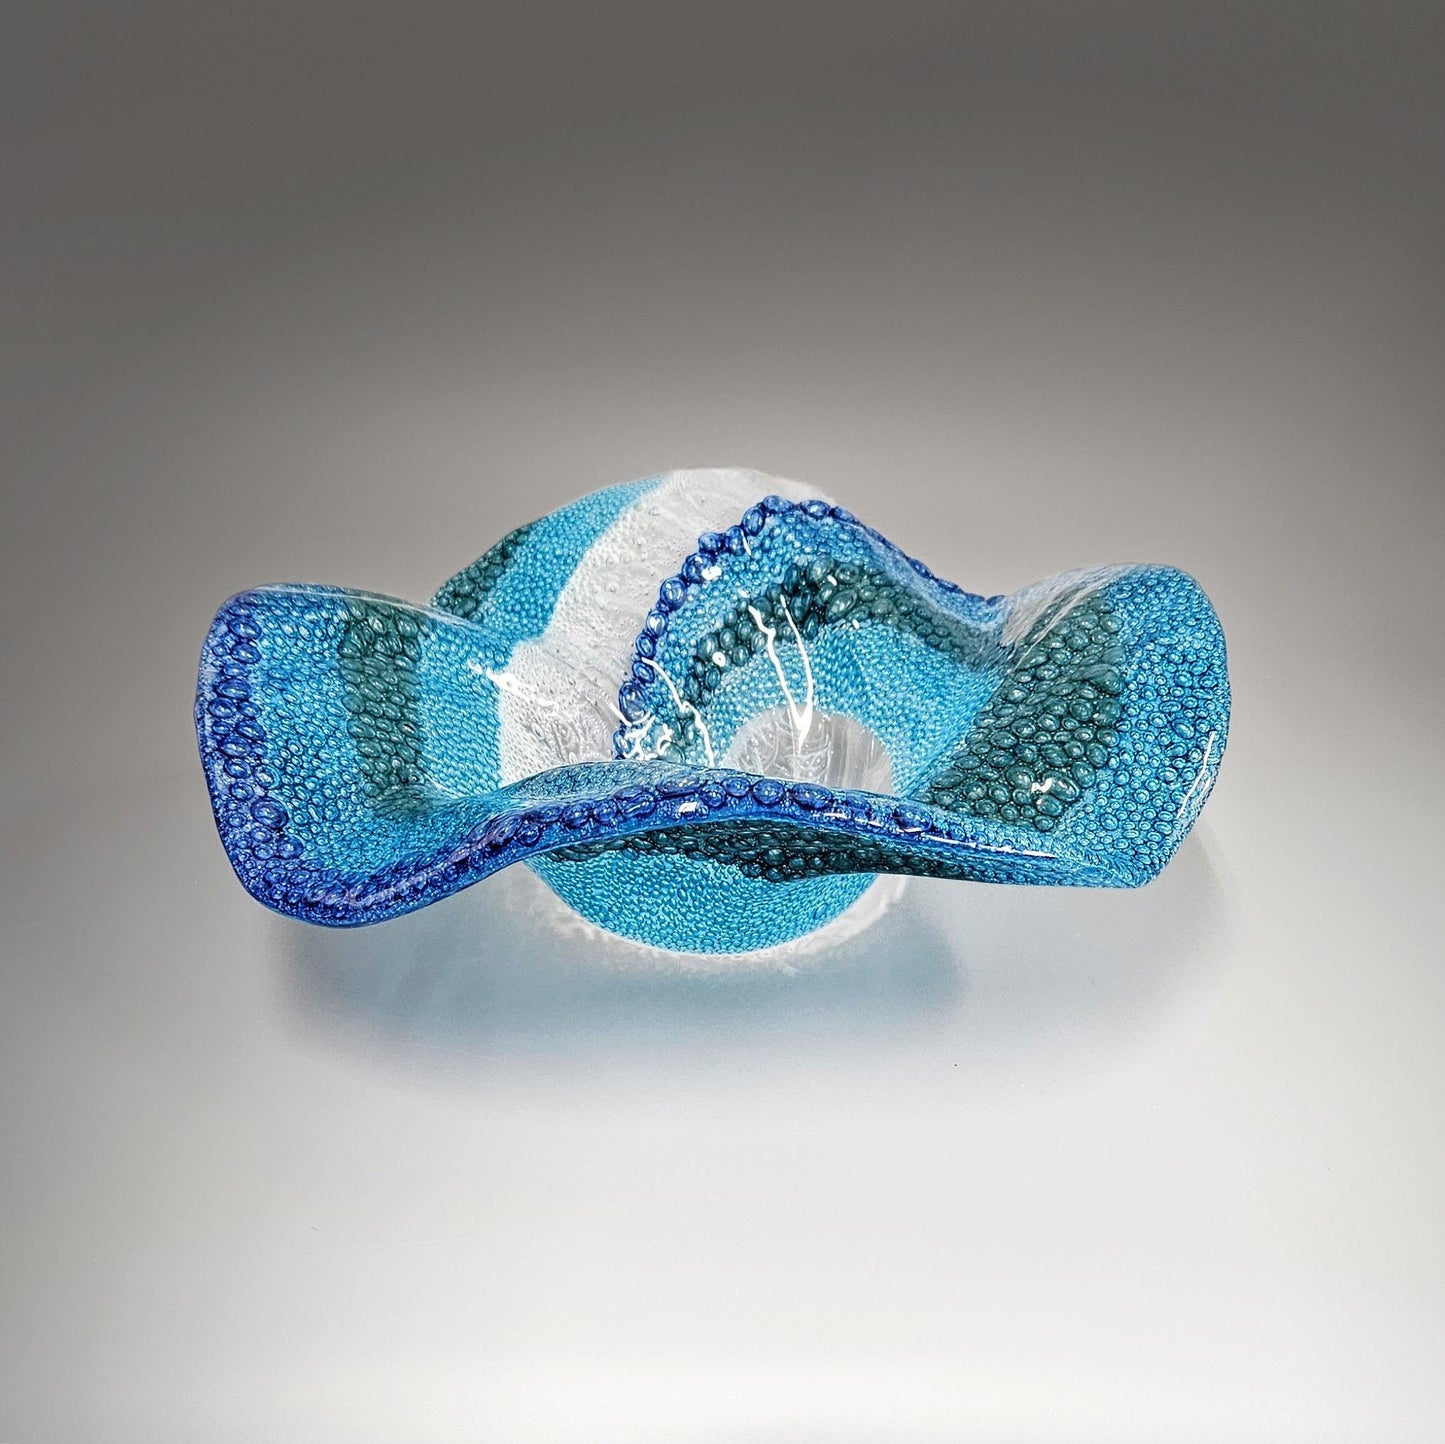 Fused Glass Art Ocean Wave Bowl in Turquoise Aqua | Beach Décor Gifts